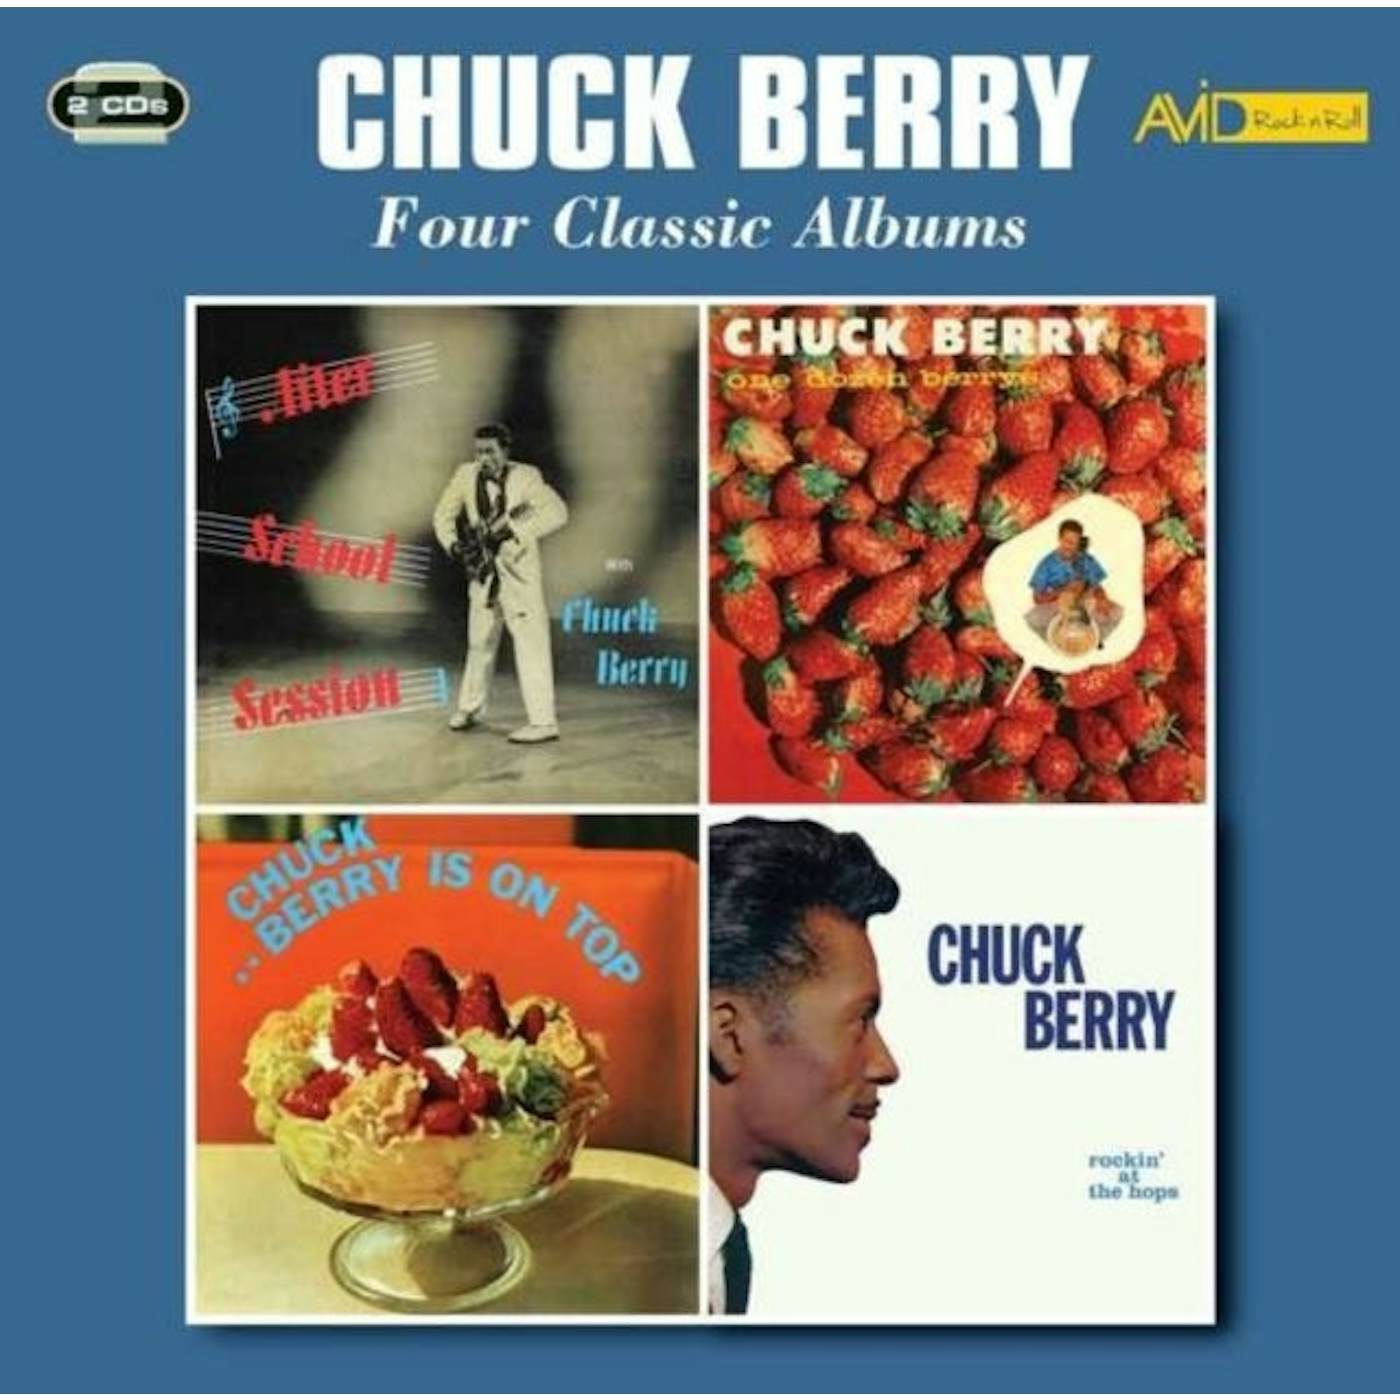 Chuck Berry CD - Four Classic Albums (After School Session / One Dozen Berrys / Chuck Berry Is On Top / Rockin' At The Hops)